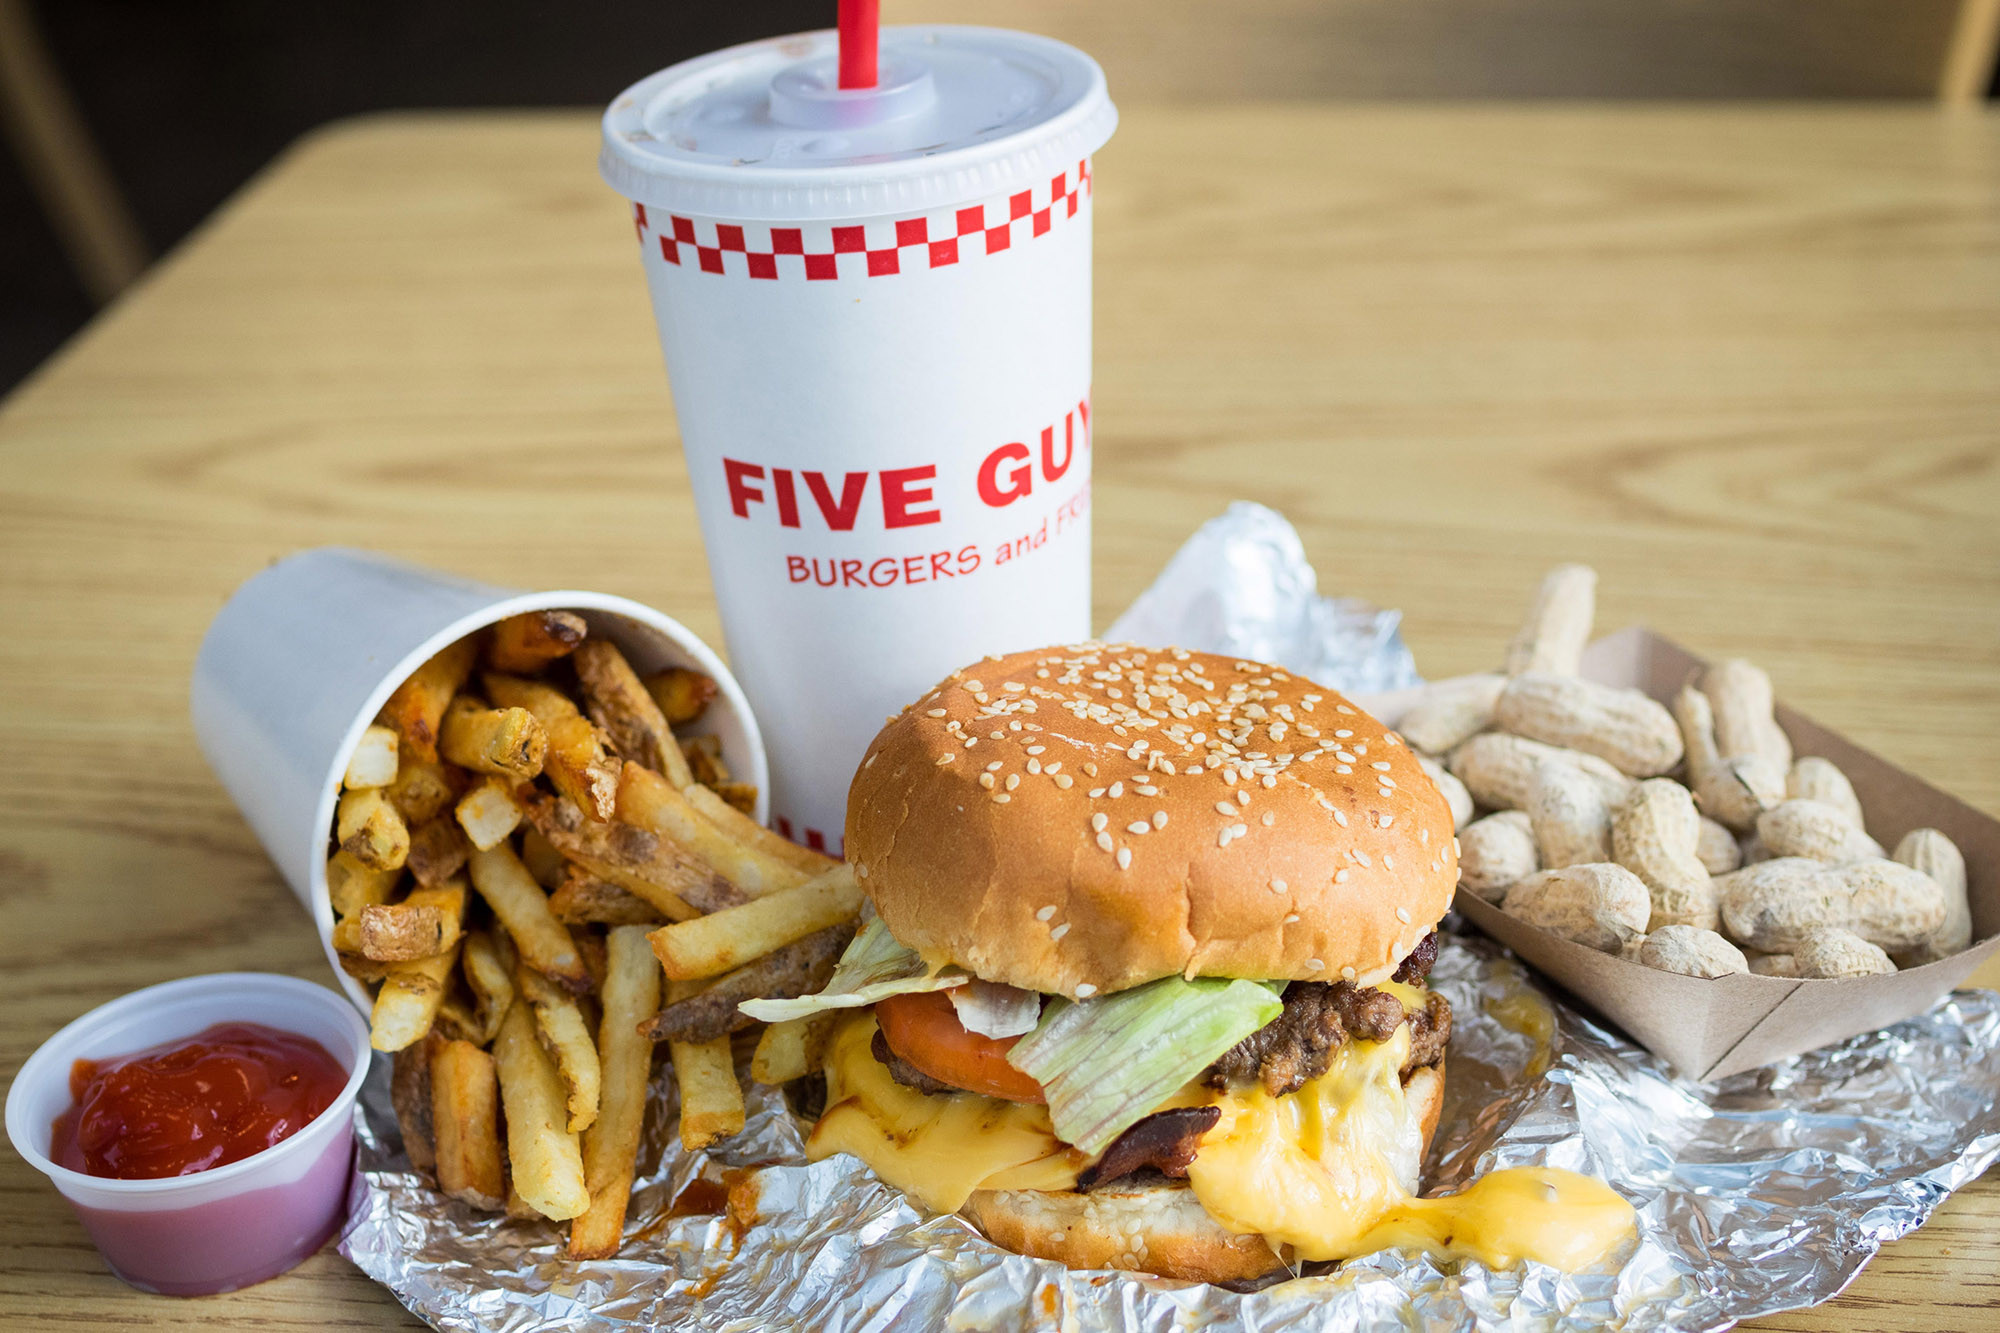 A bacon cheeseburger, French fries, and peanuts from Five Guys Burgers and Fries, an American fast casual restaurant chain.